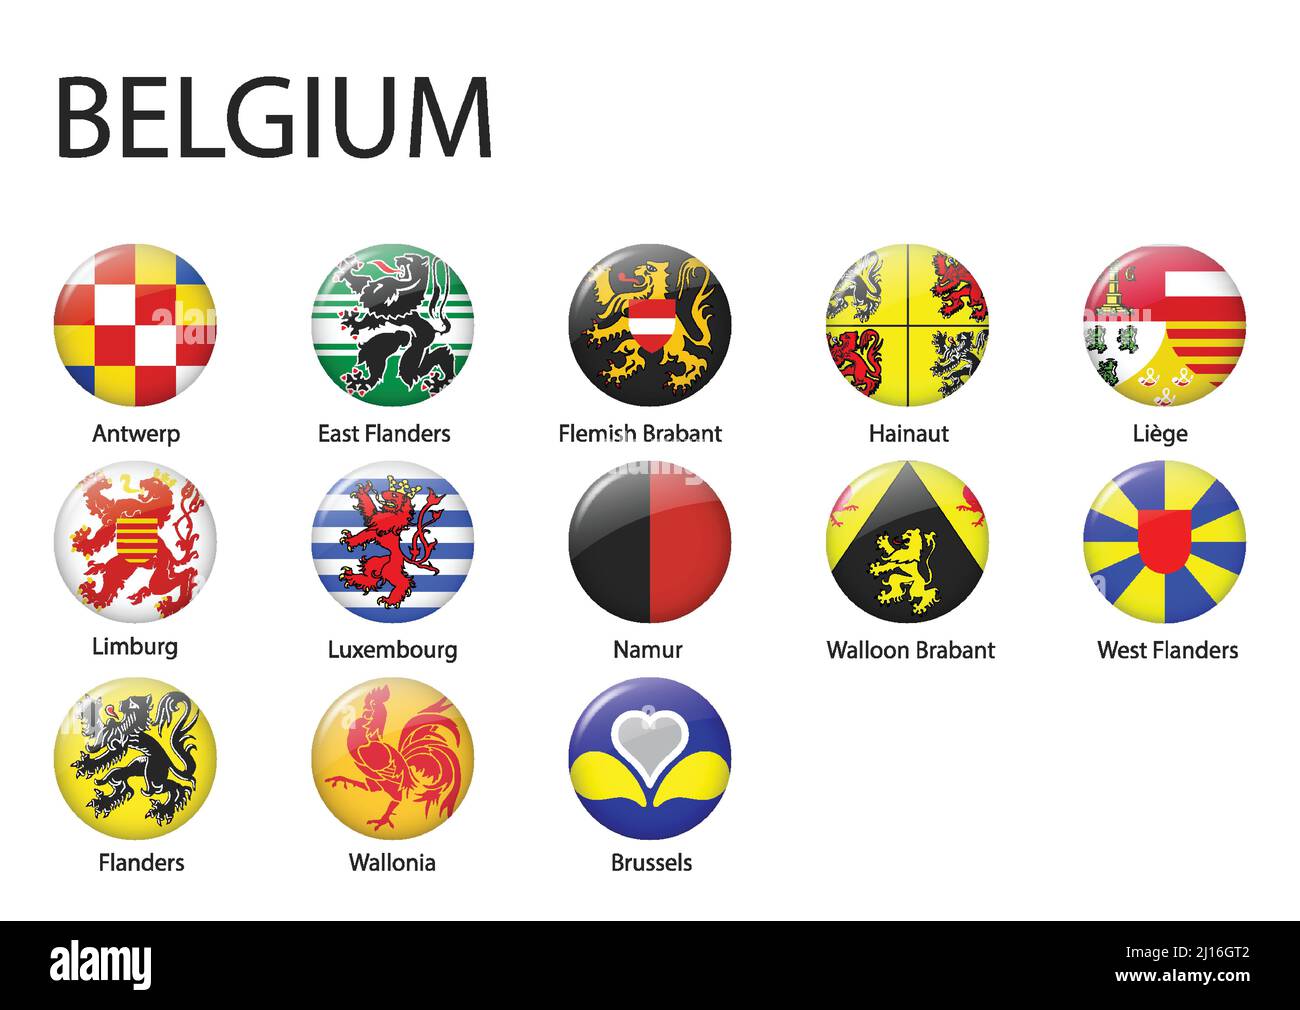 all Flags of regions of Belgium. Glossy button flag design Stock Vector